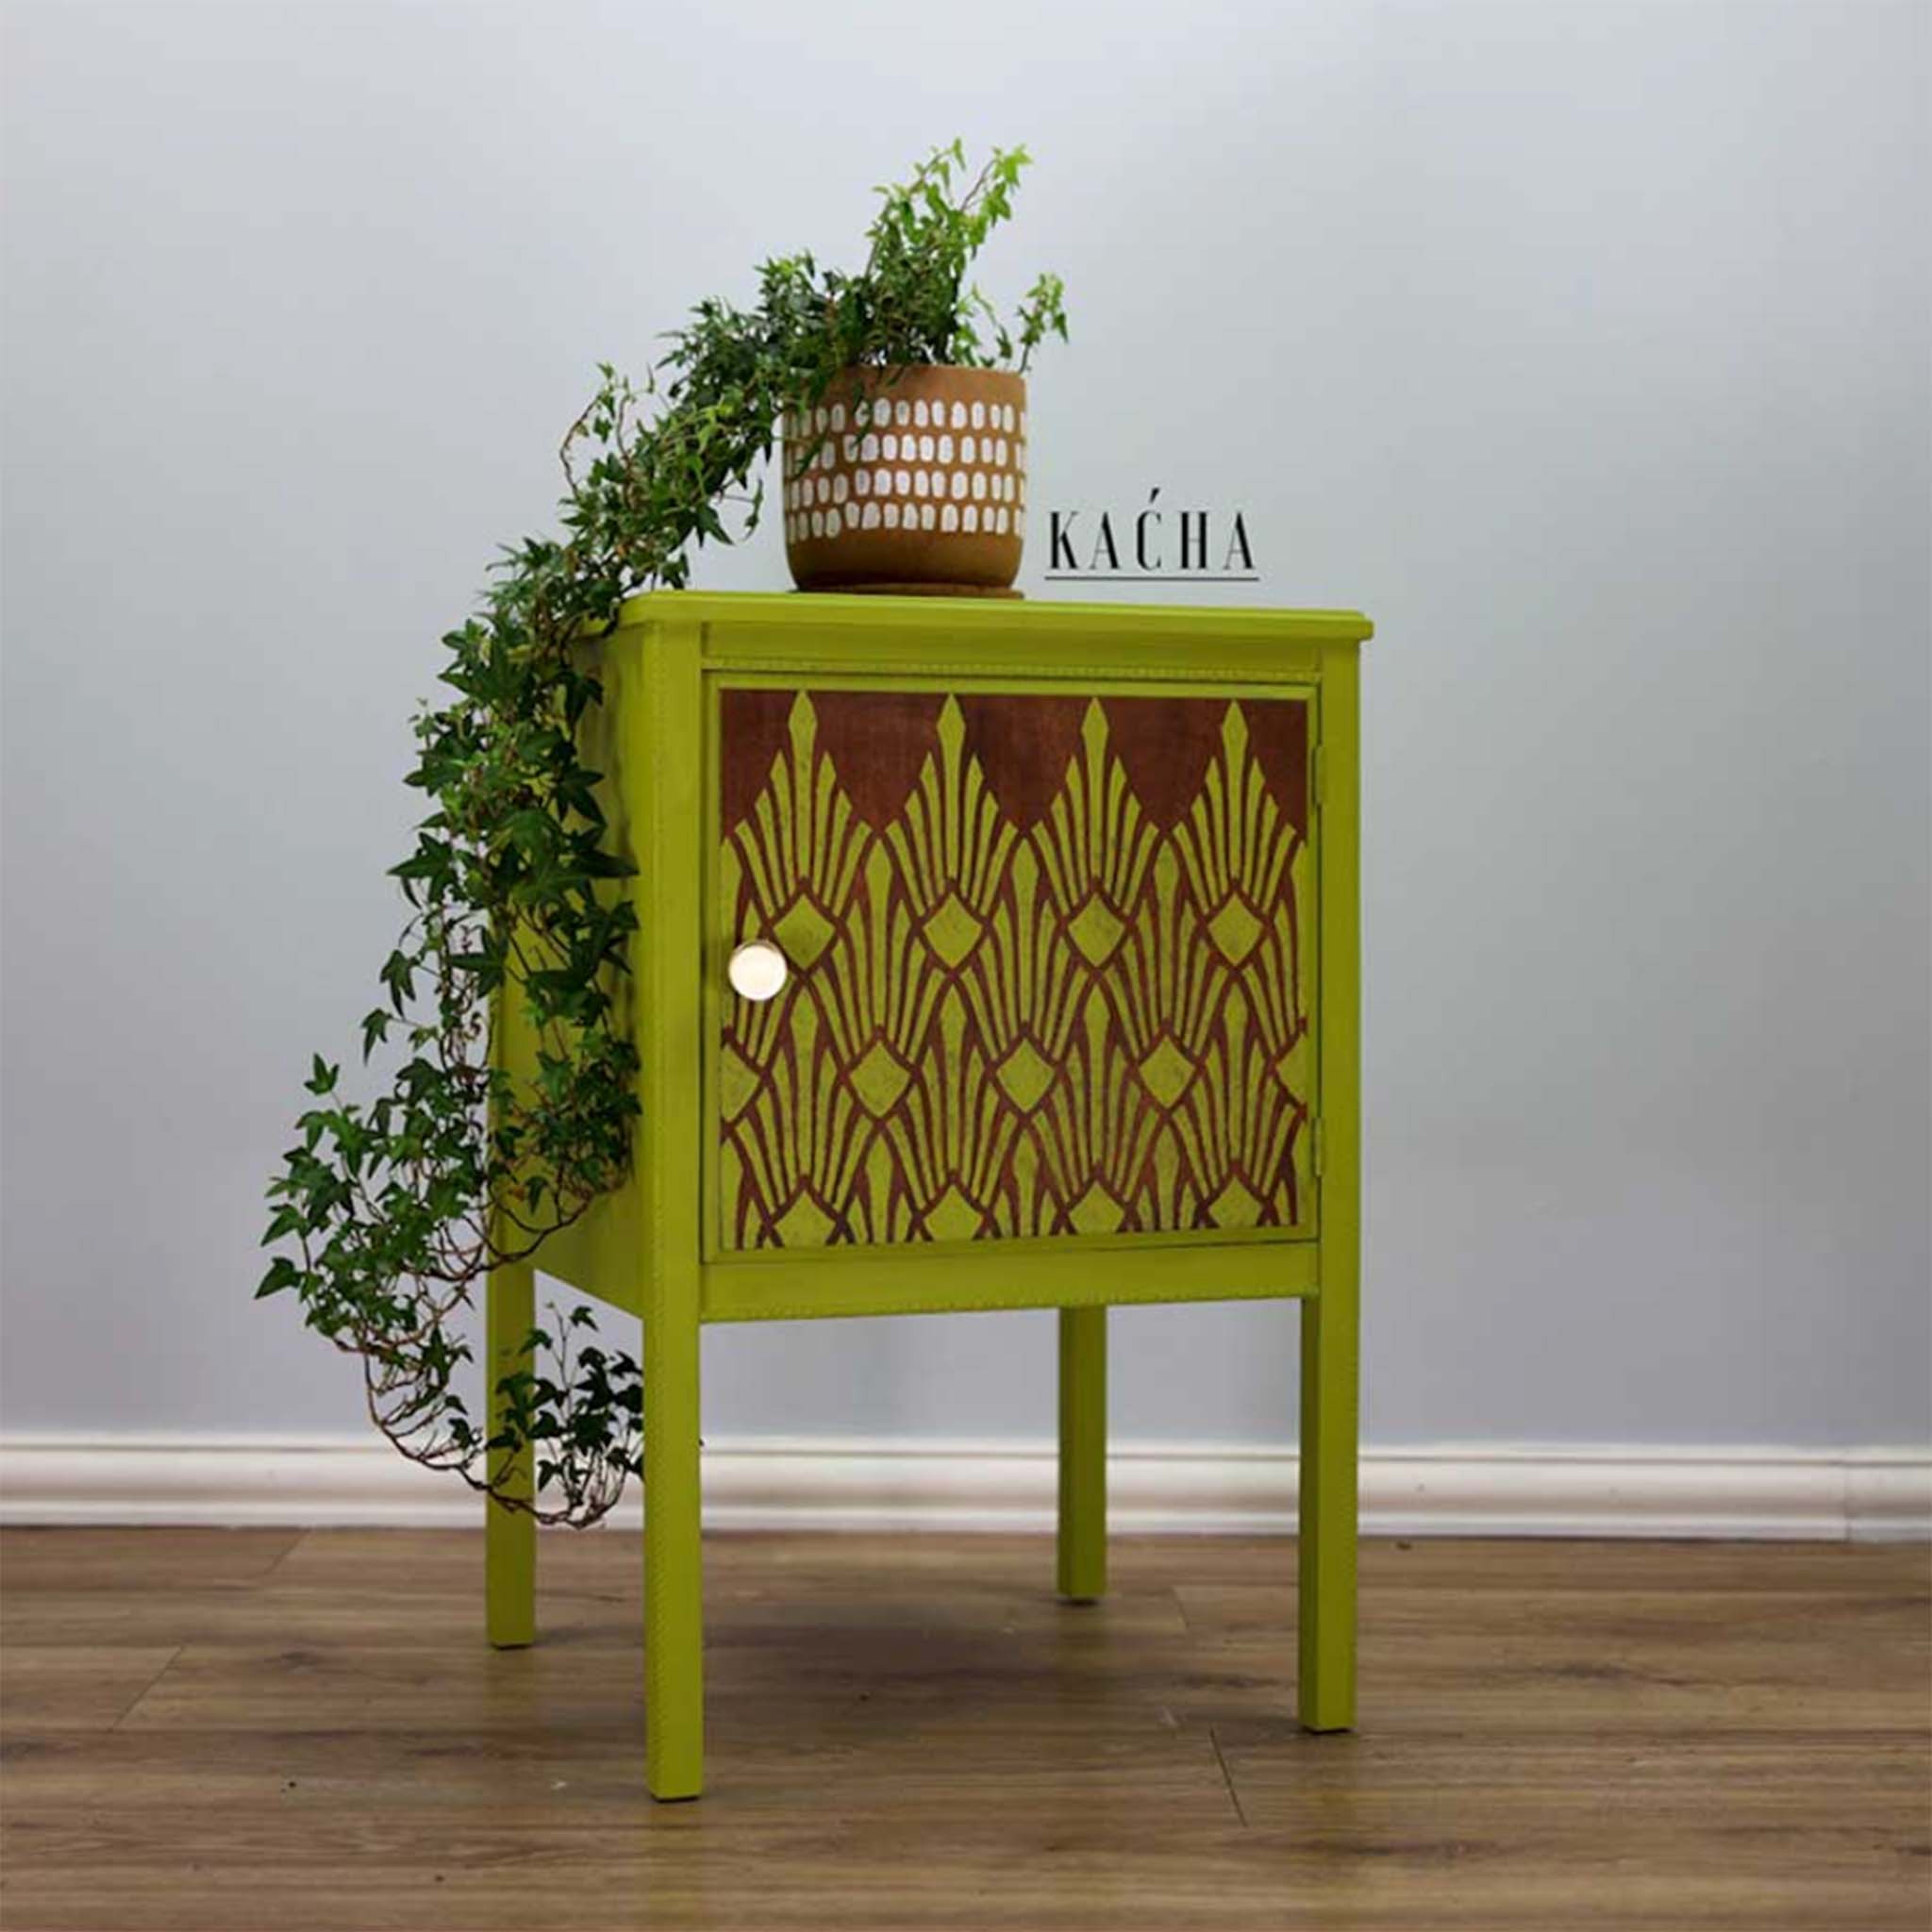 A small 1-door nightstand refurbished by Kacha is painted avocado green. The door is stained a dark wood color and features ReDesign with Prima's Sunlit Diamonds stencil in avocado green.